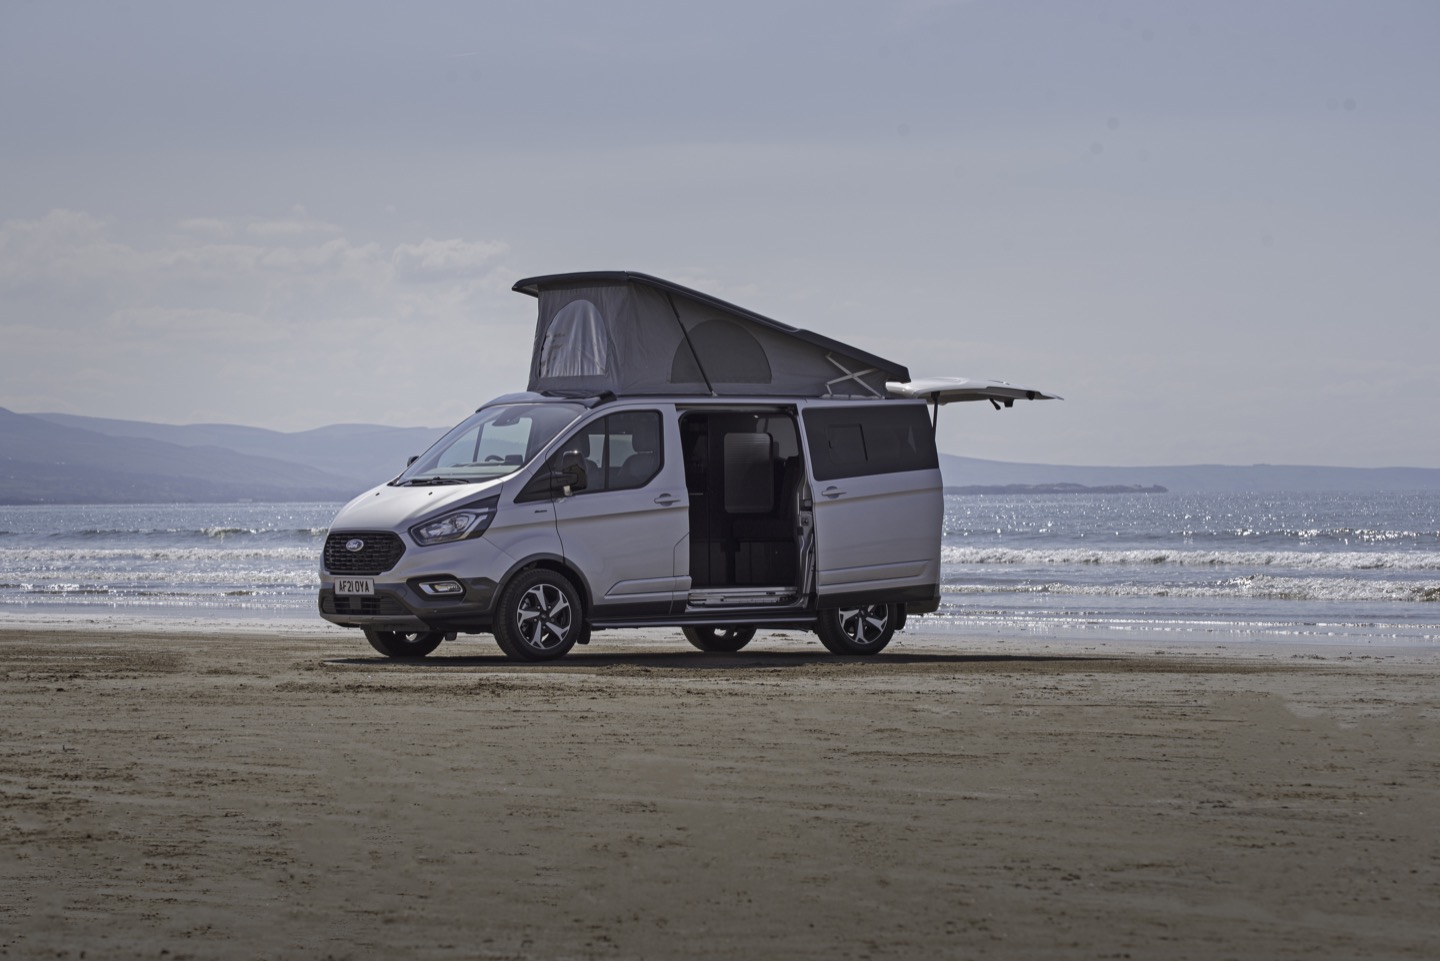 Hire the Ford Nugget campervan with pop-up roof